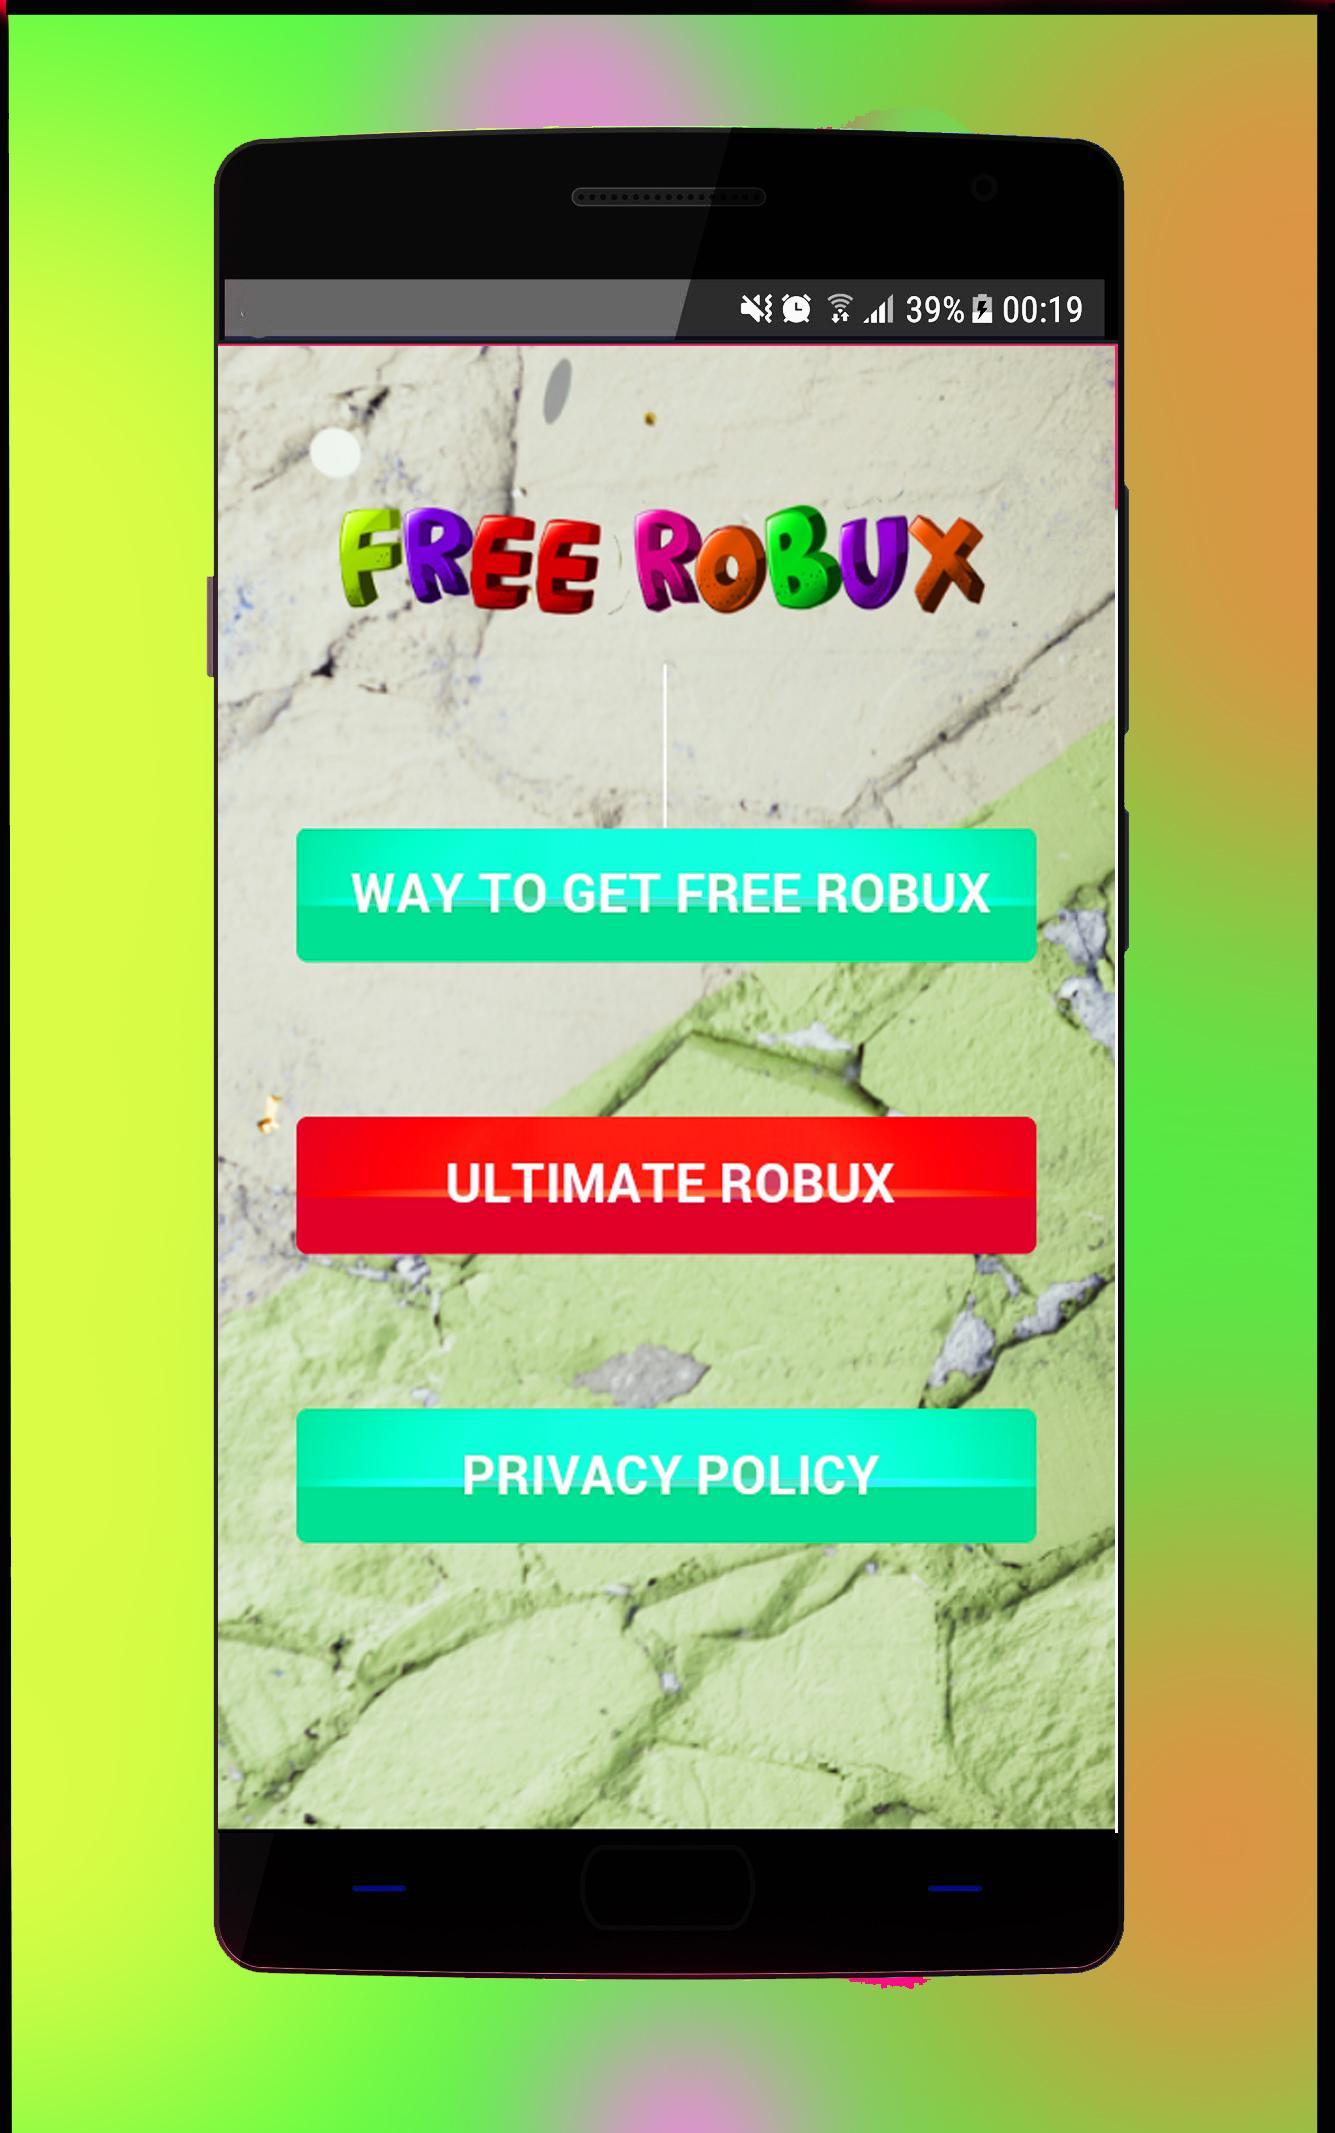 Free Mobile 24 Robux How To Get Free Robux In Less Than 1 - lg robux unlimited robux hacks that work